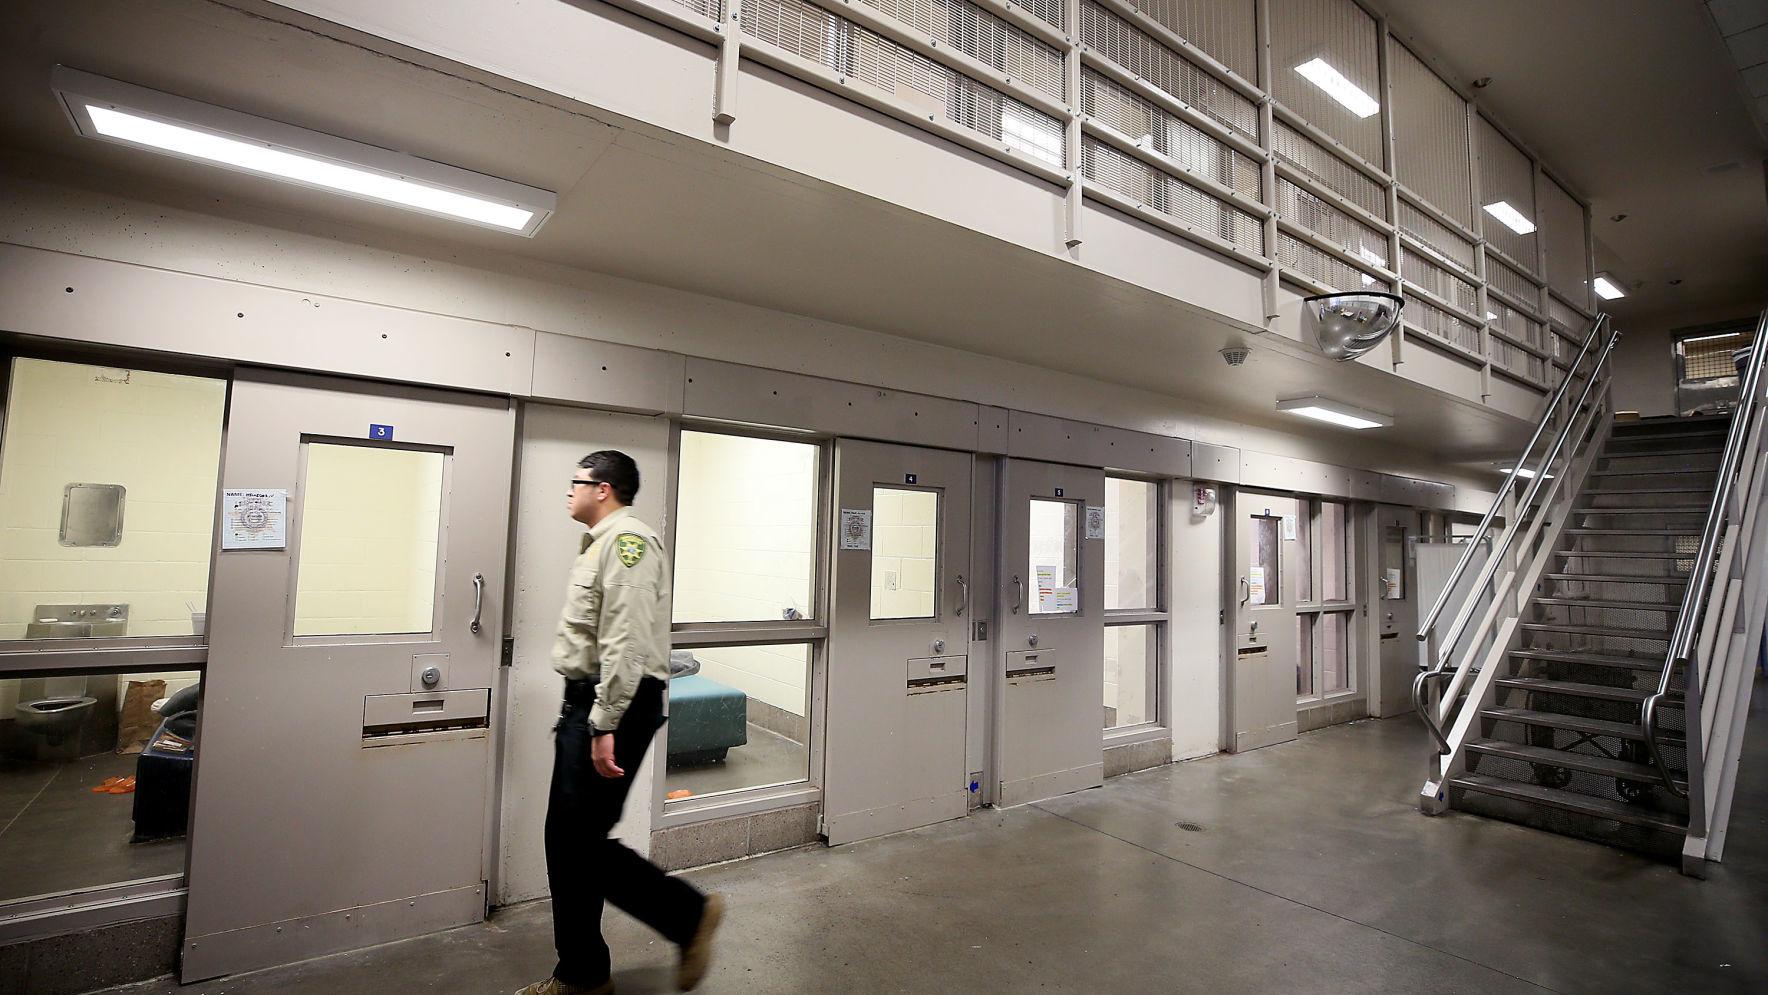 42-year-old Pima County jail inmate found dead